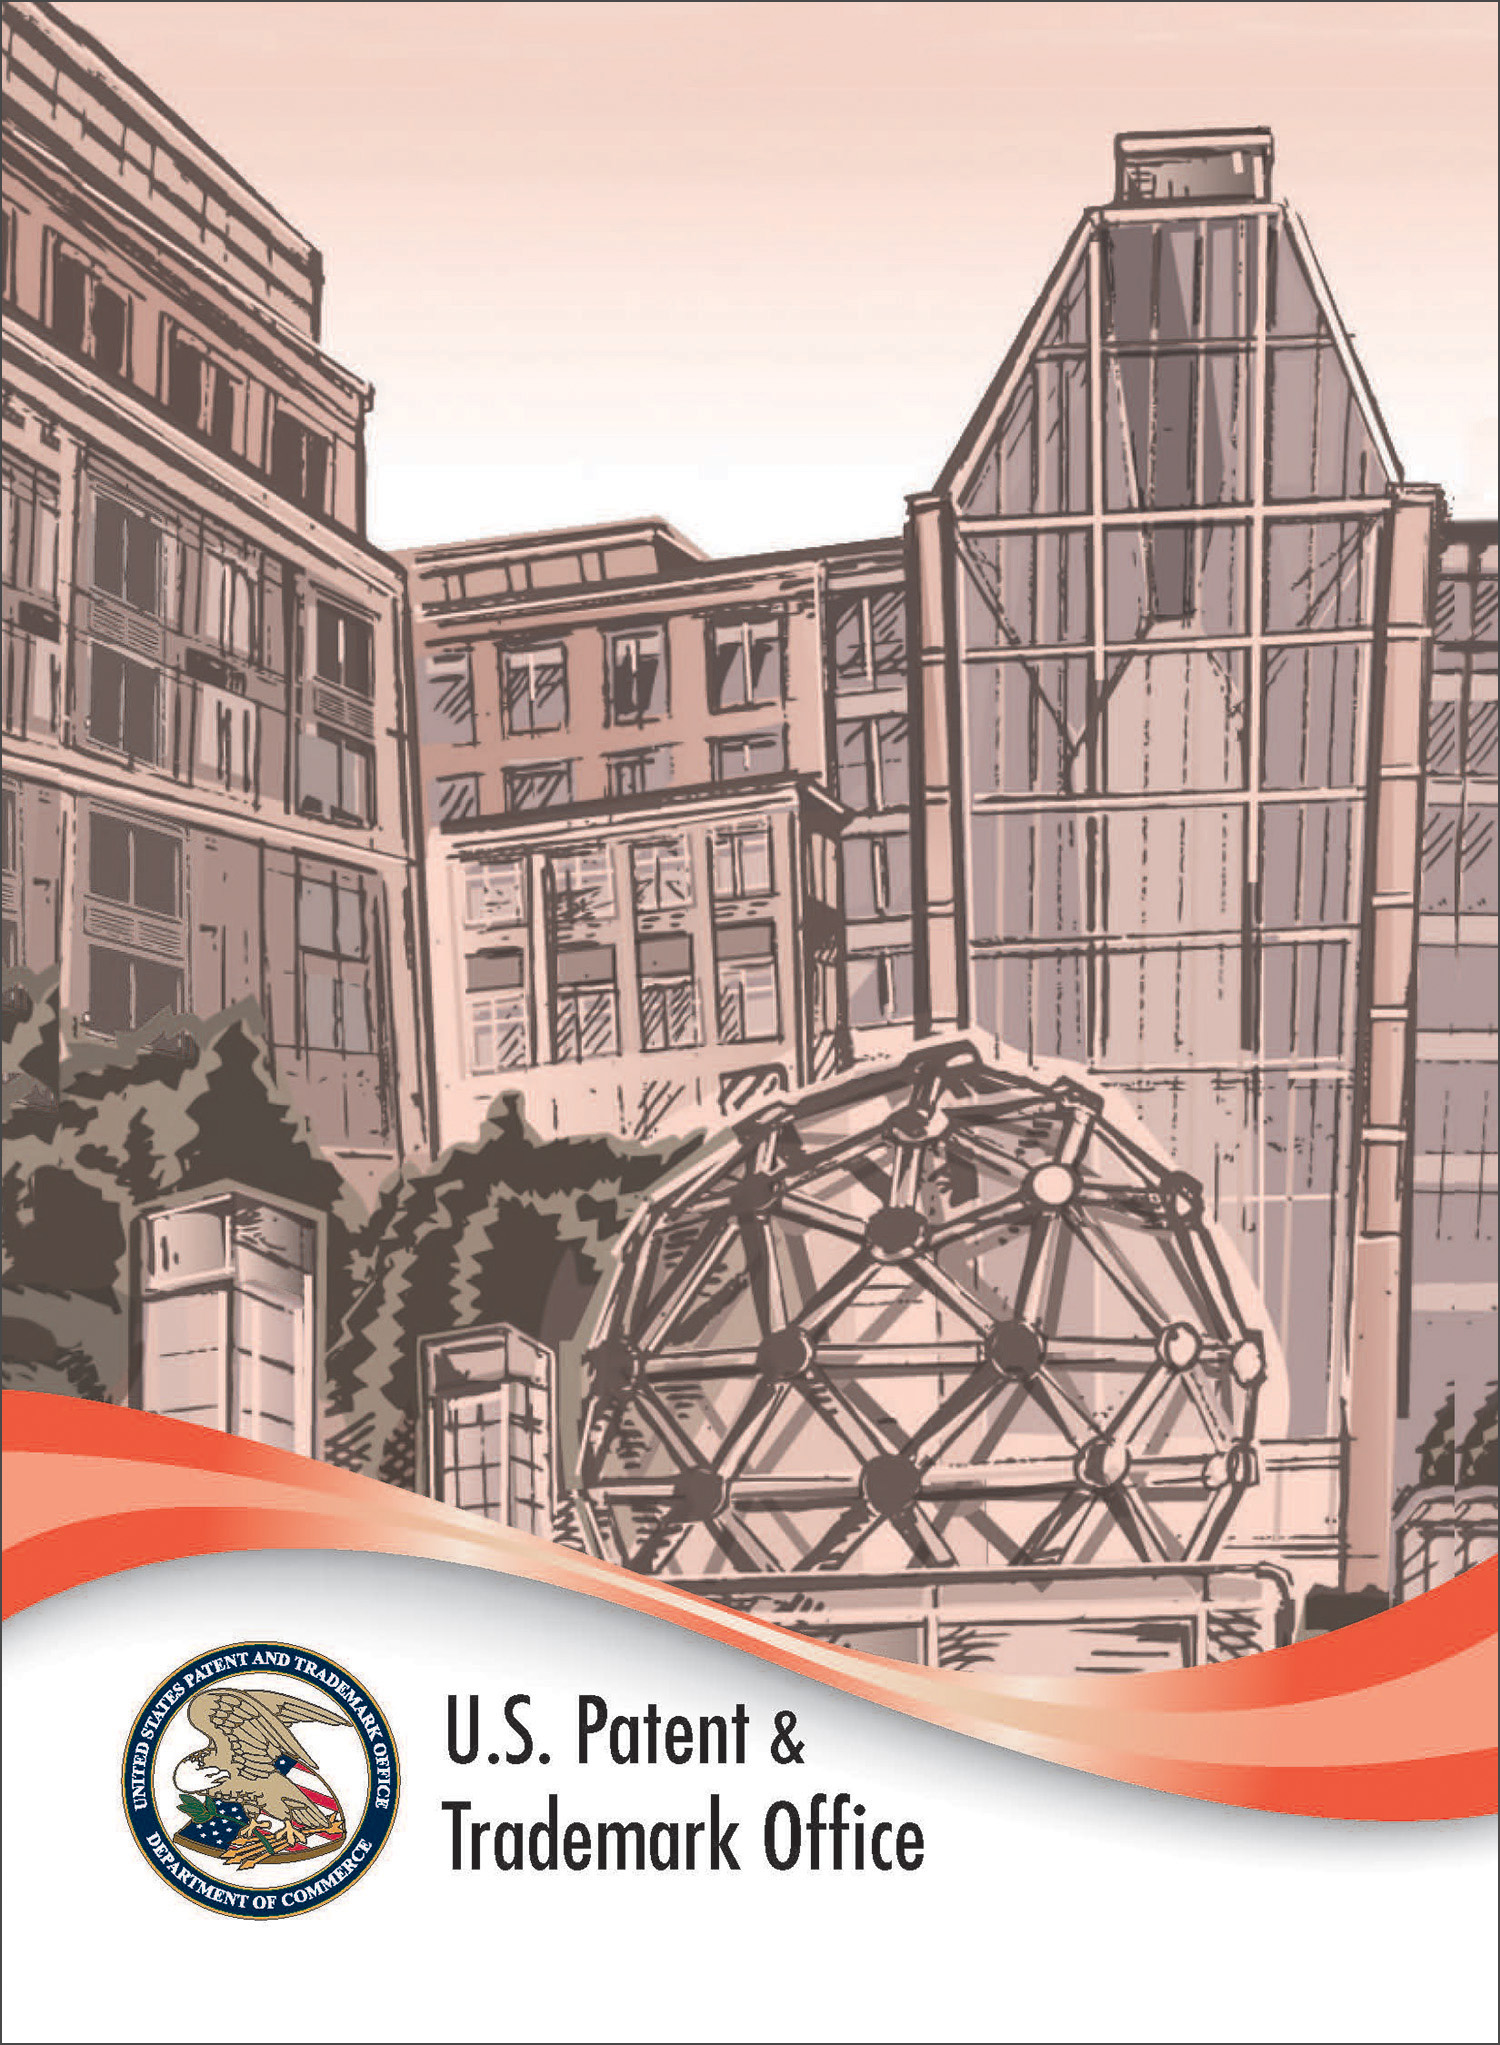 US Patent and Trademark Office headquarters